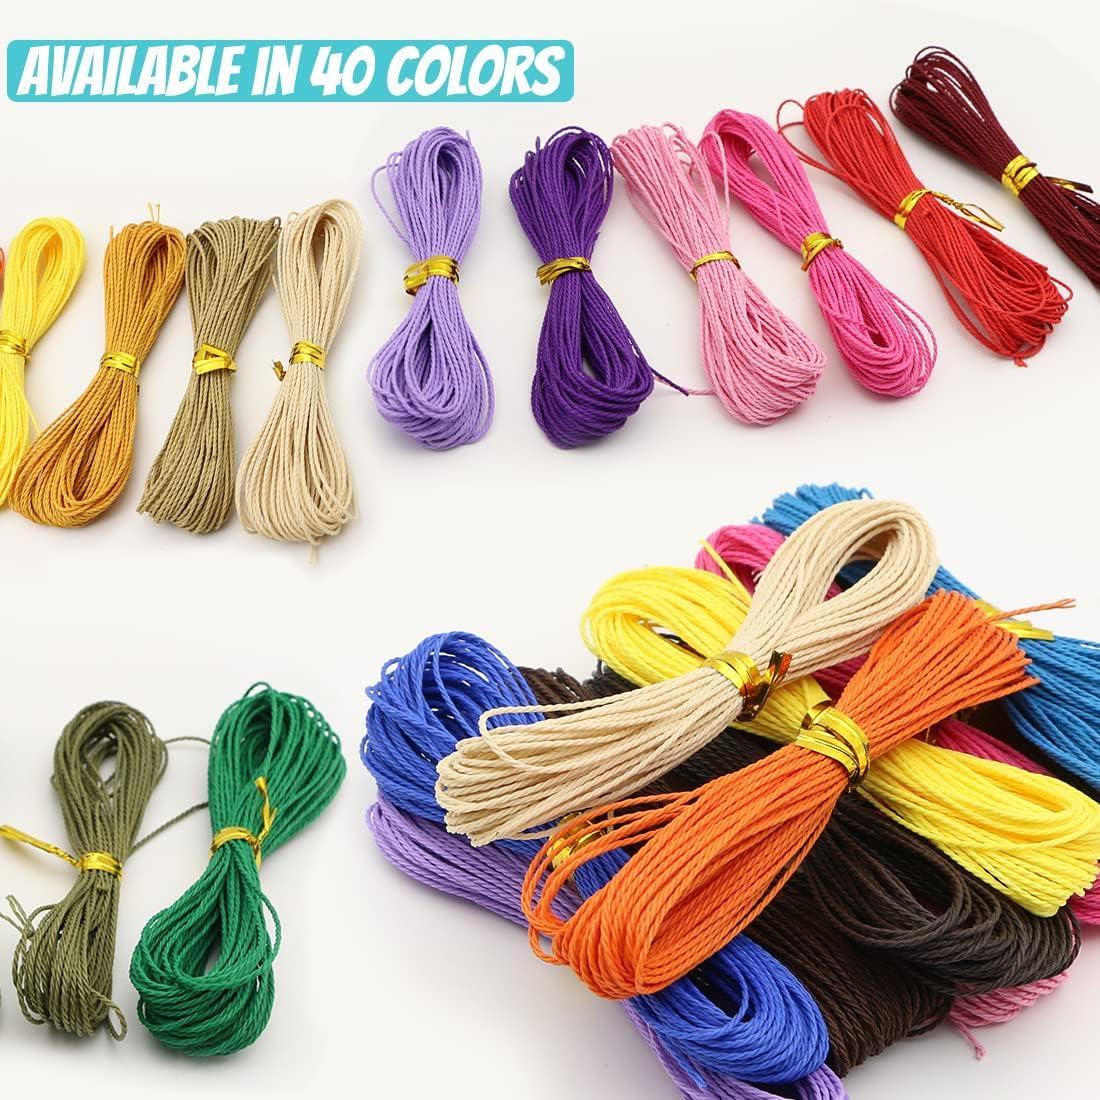 WillingTee 40 Colors 1mm Waxed Polyester Cord 437 Yard 1mm Waxed Bracelet Cord  Wax String Cord Waxed Thread for DIY Bracelets Necklace Jewelry Making  Friendship Bracelet